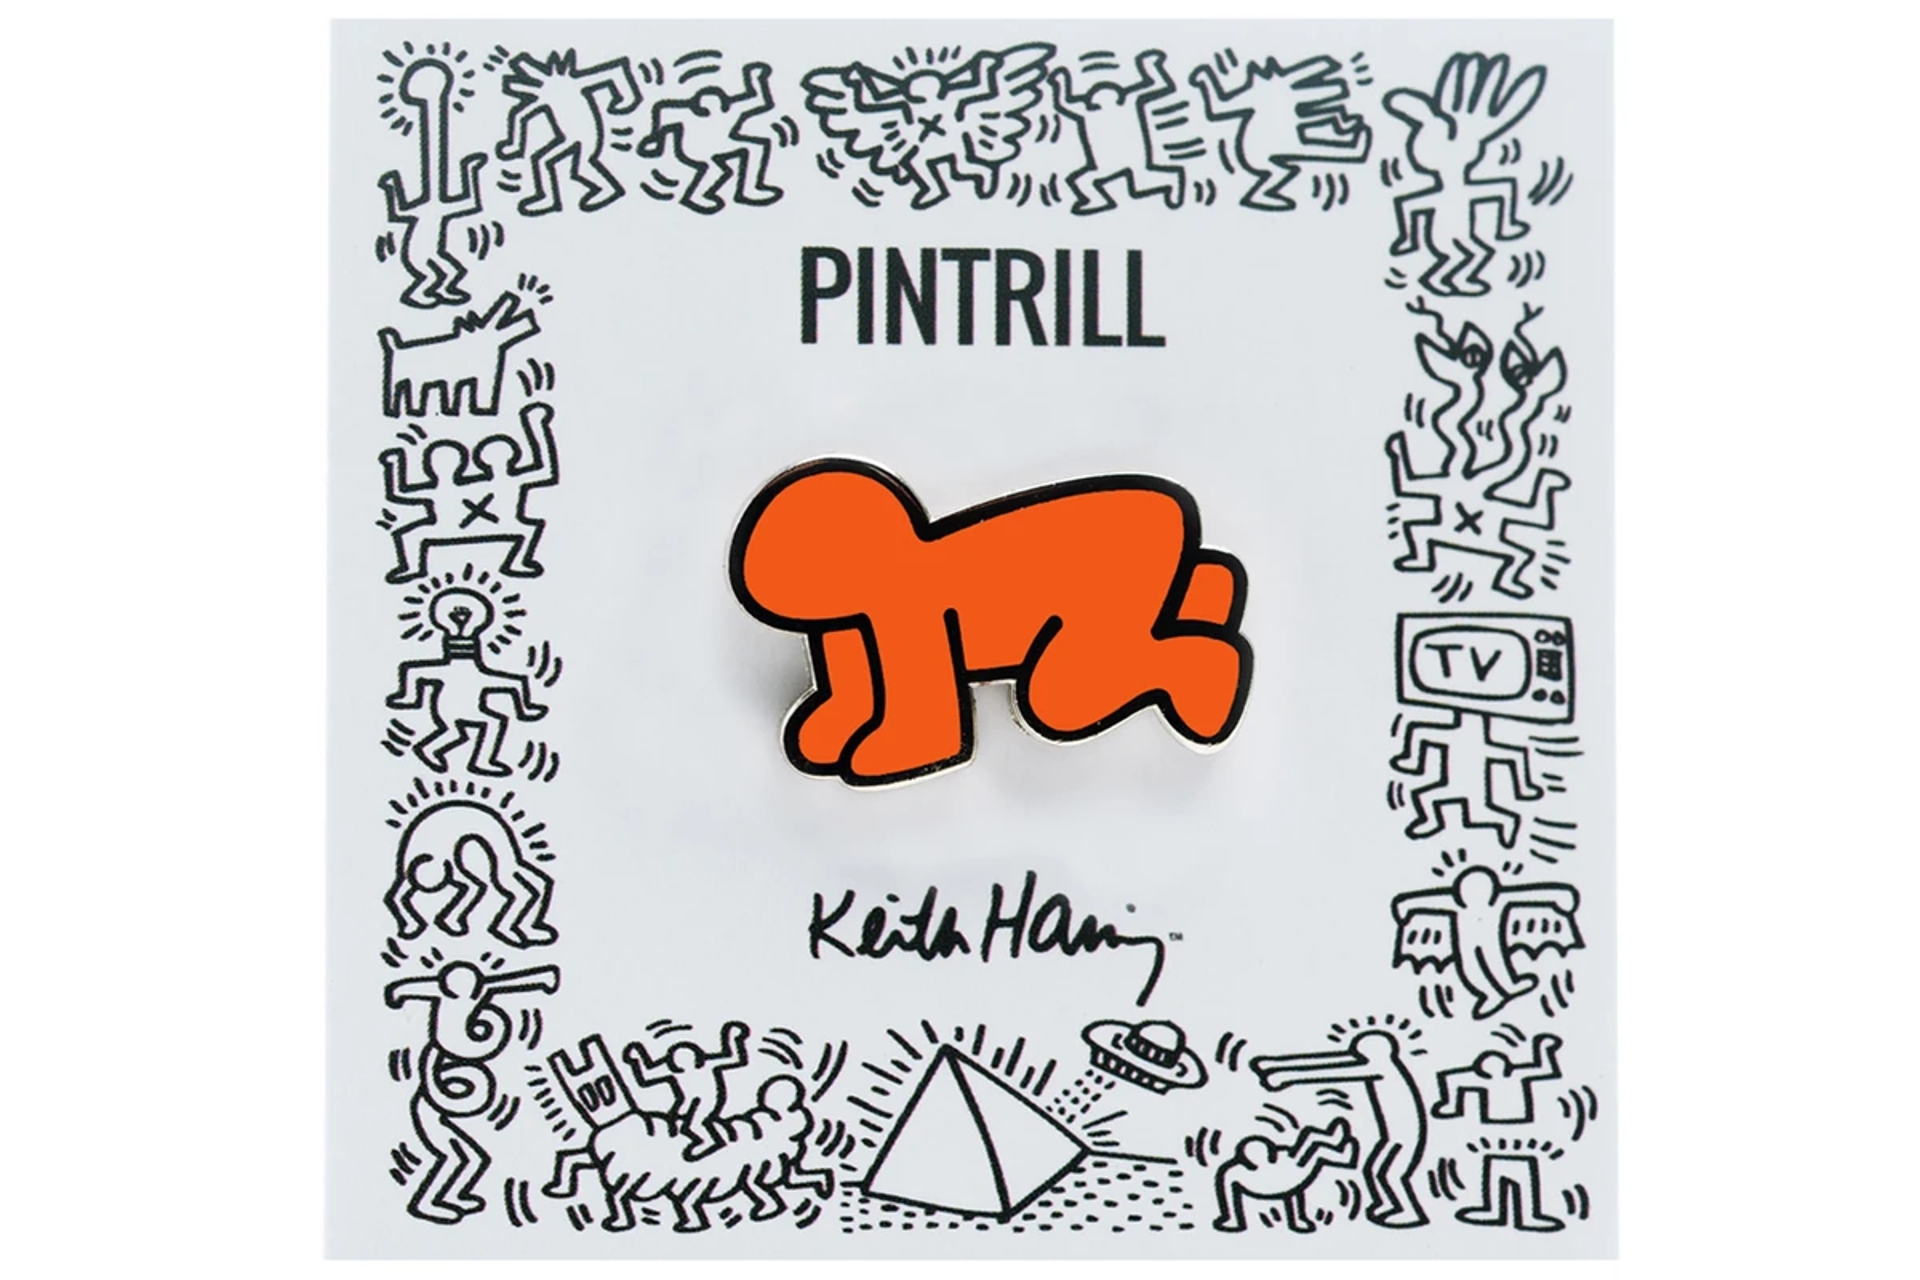 Keith Haring - Radiant Baby Orange Pin by Keith Haring